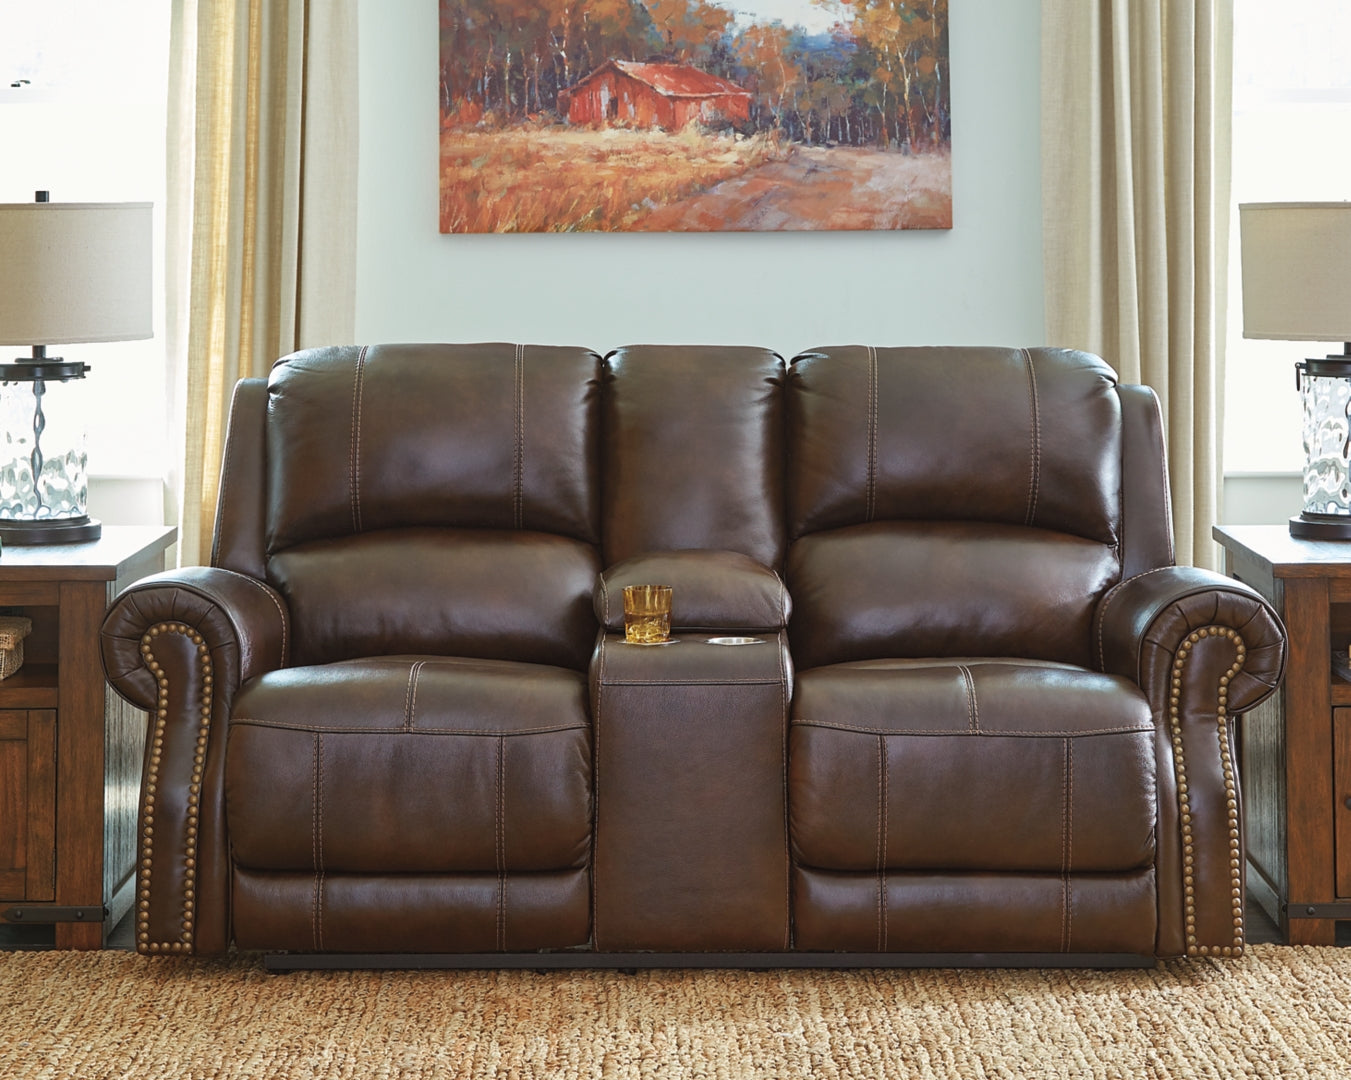 Buncrana Power Reclining Loveseat with Console